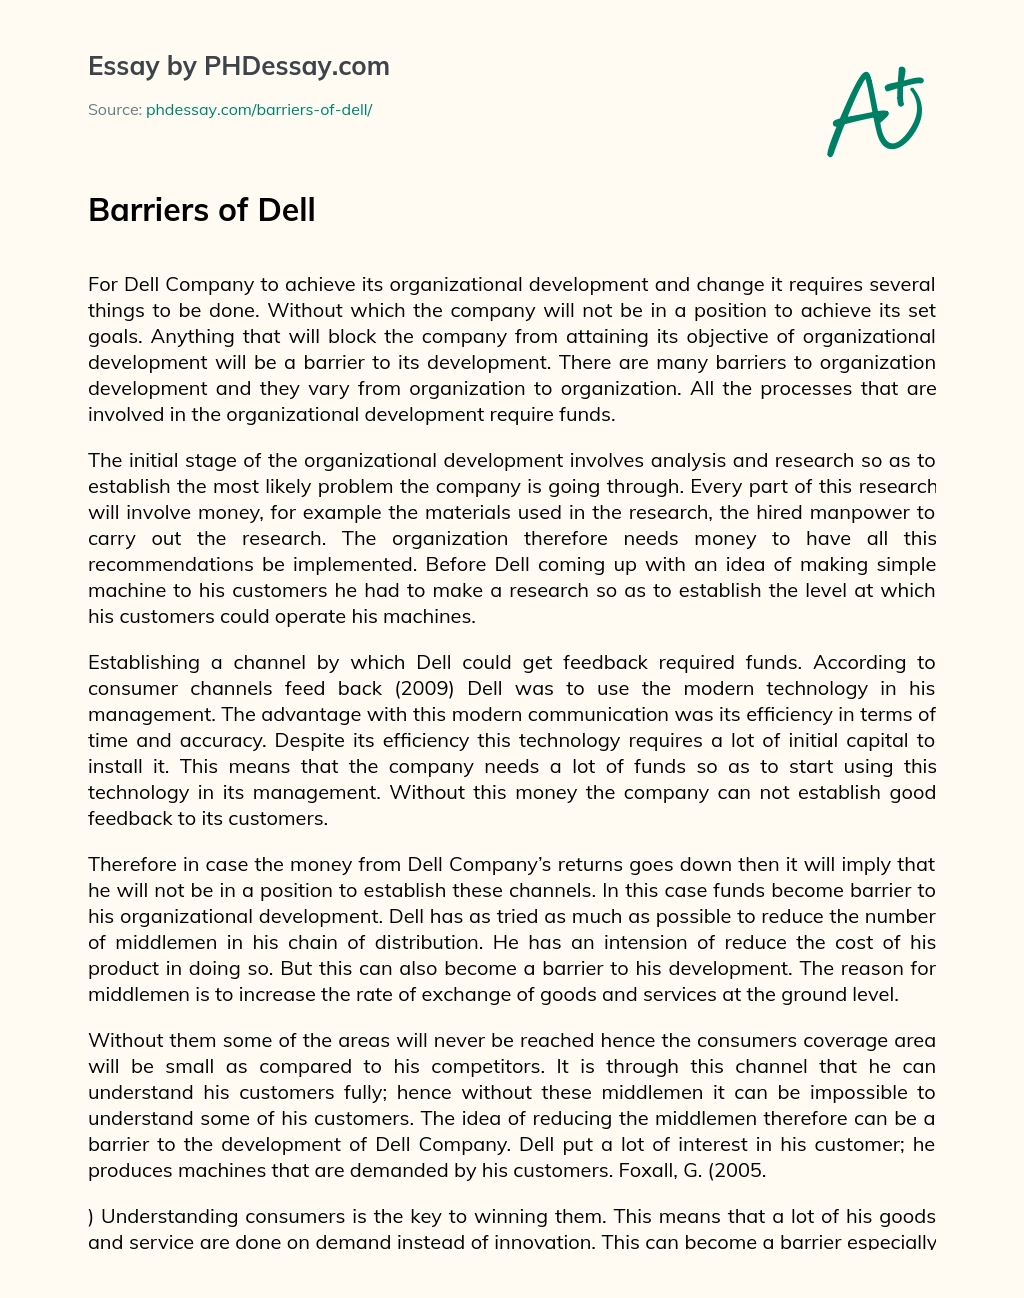 Barriers of Dell essay